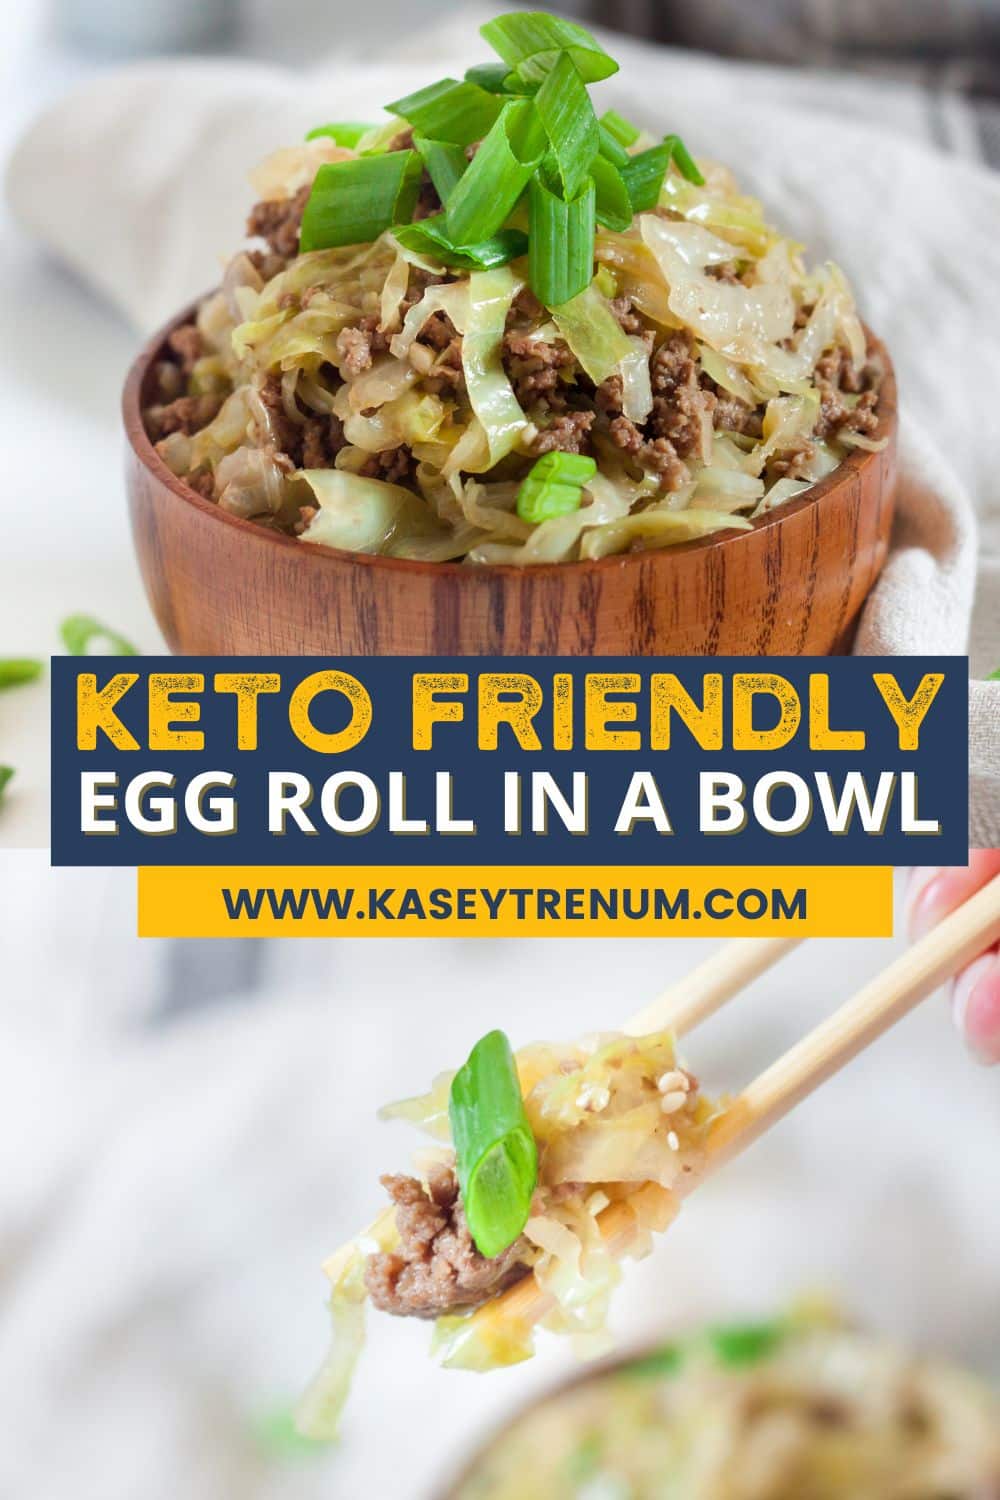 collage image with finished egg roll in a bowl recipe served in a wooden bowl, yellowing and white lettering across a blue banner.